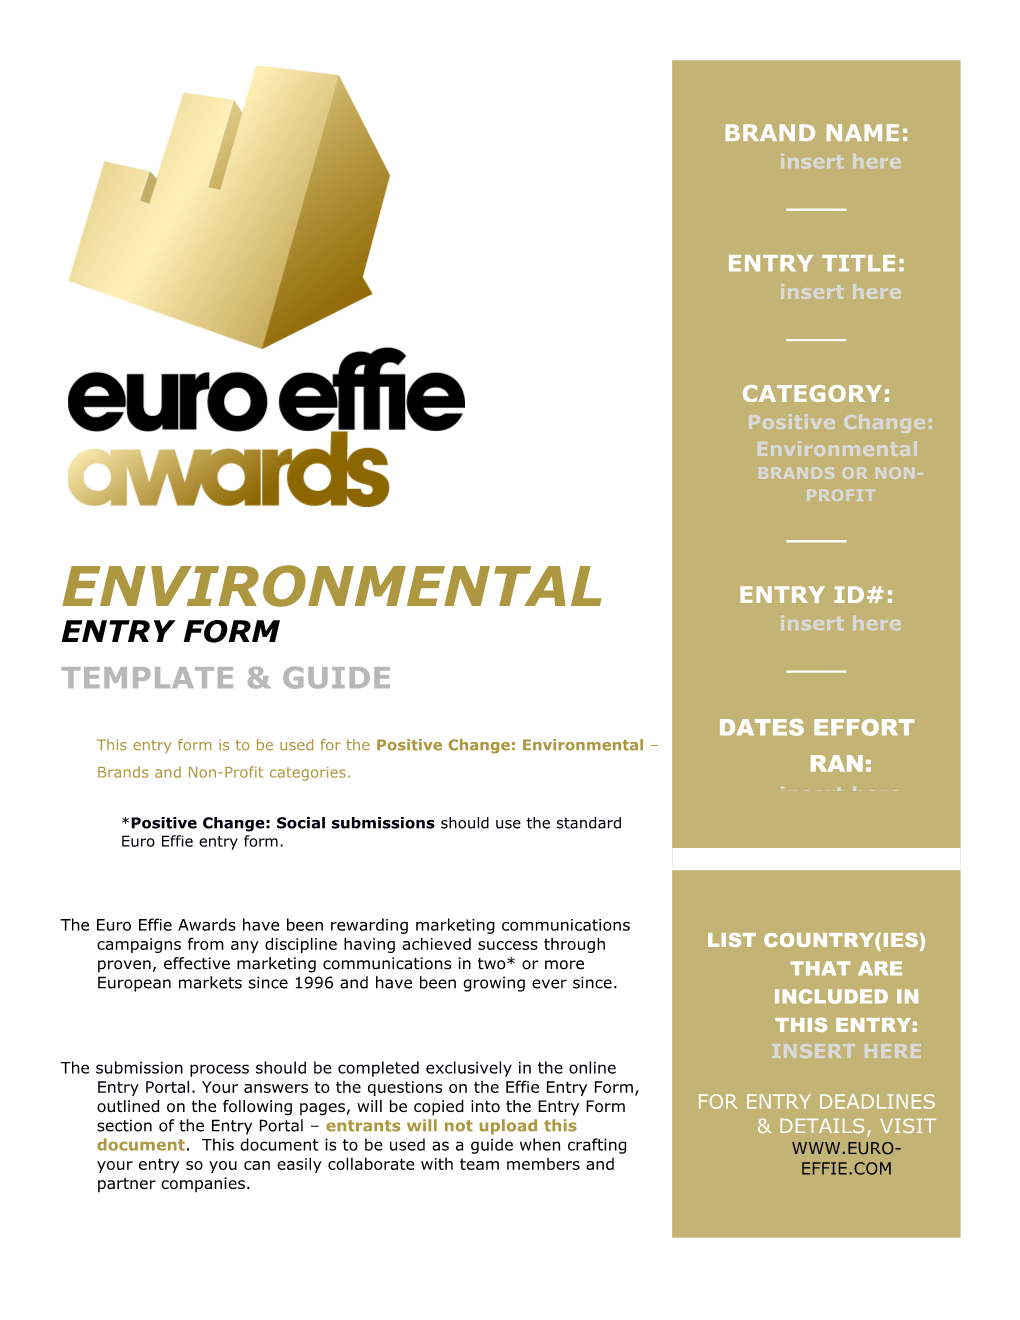 *Positive Change: Social Submissions Should Use the Standard Euro Effie Entry Form